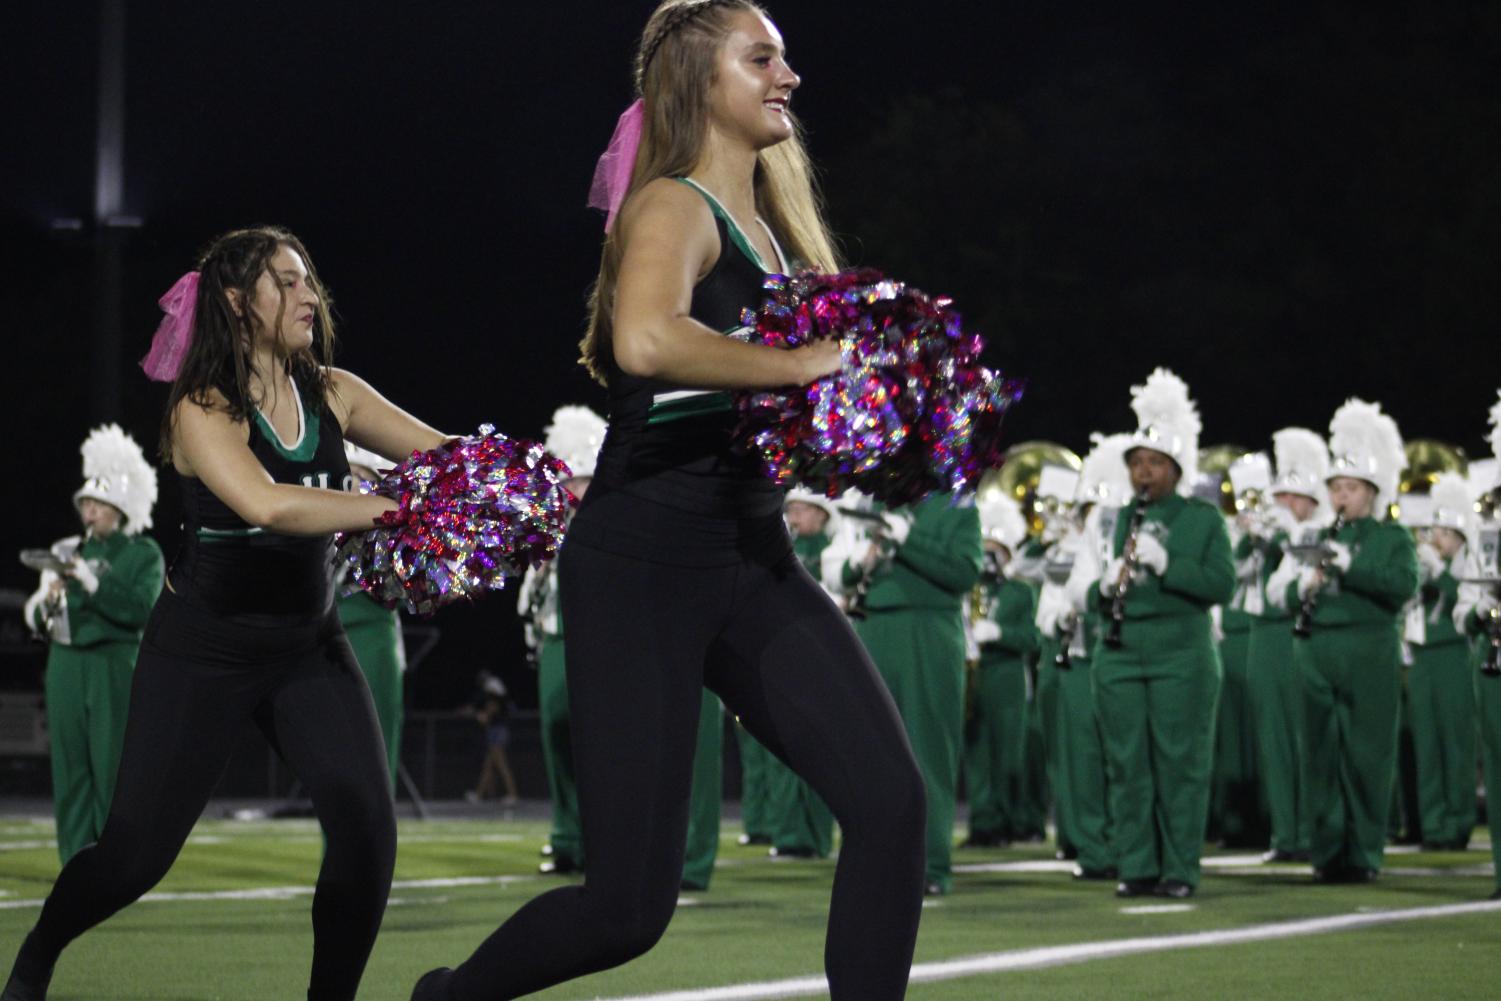 Cheer+and+Dance+Team+at+Campus+Football+Game+%28Photos+by+Agness+Mbezi%29